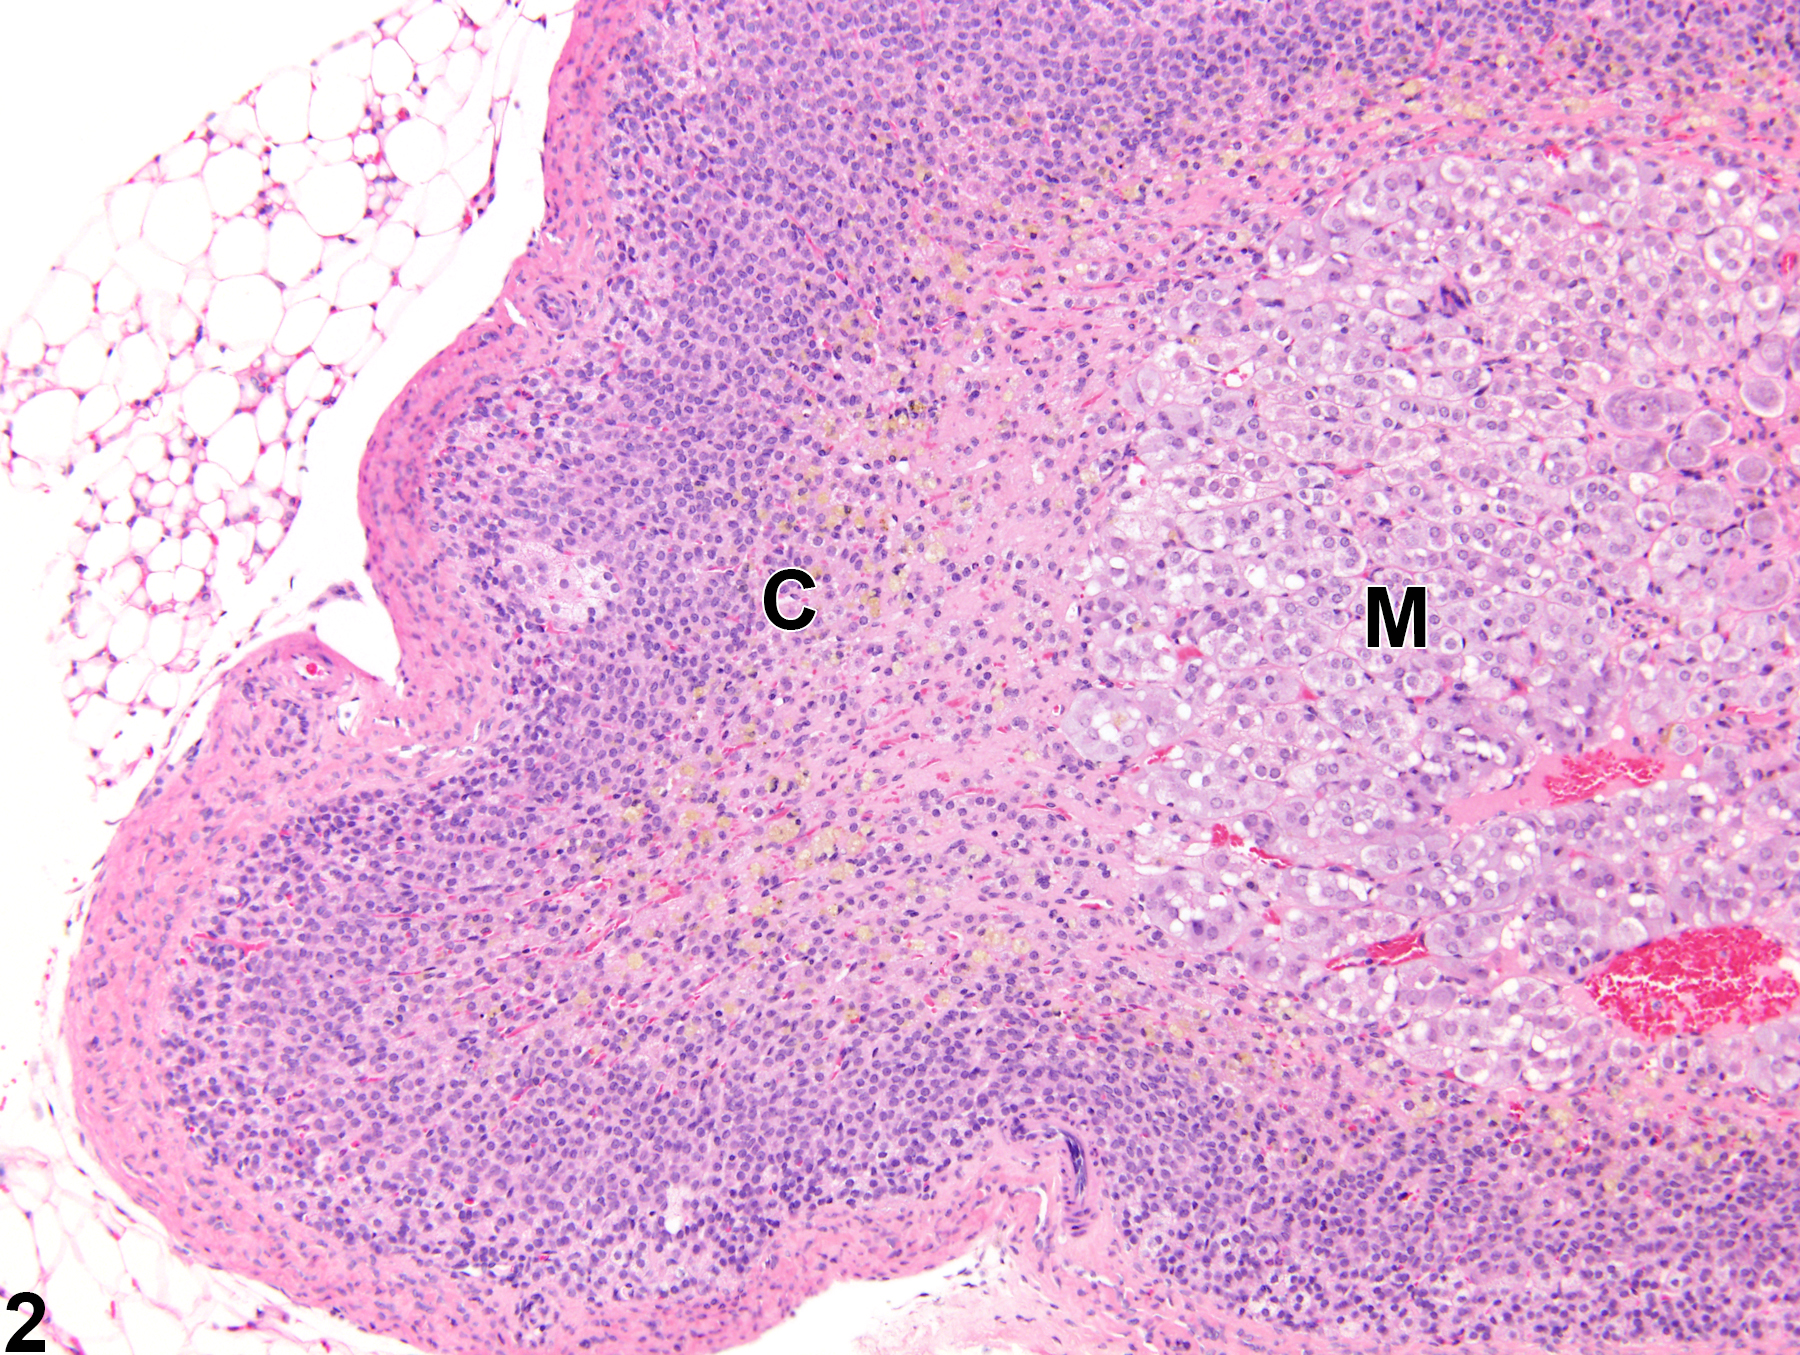 Image of atrophy in the adrenal gland cortex from a female Sprague-Dawley rat in a chronic study